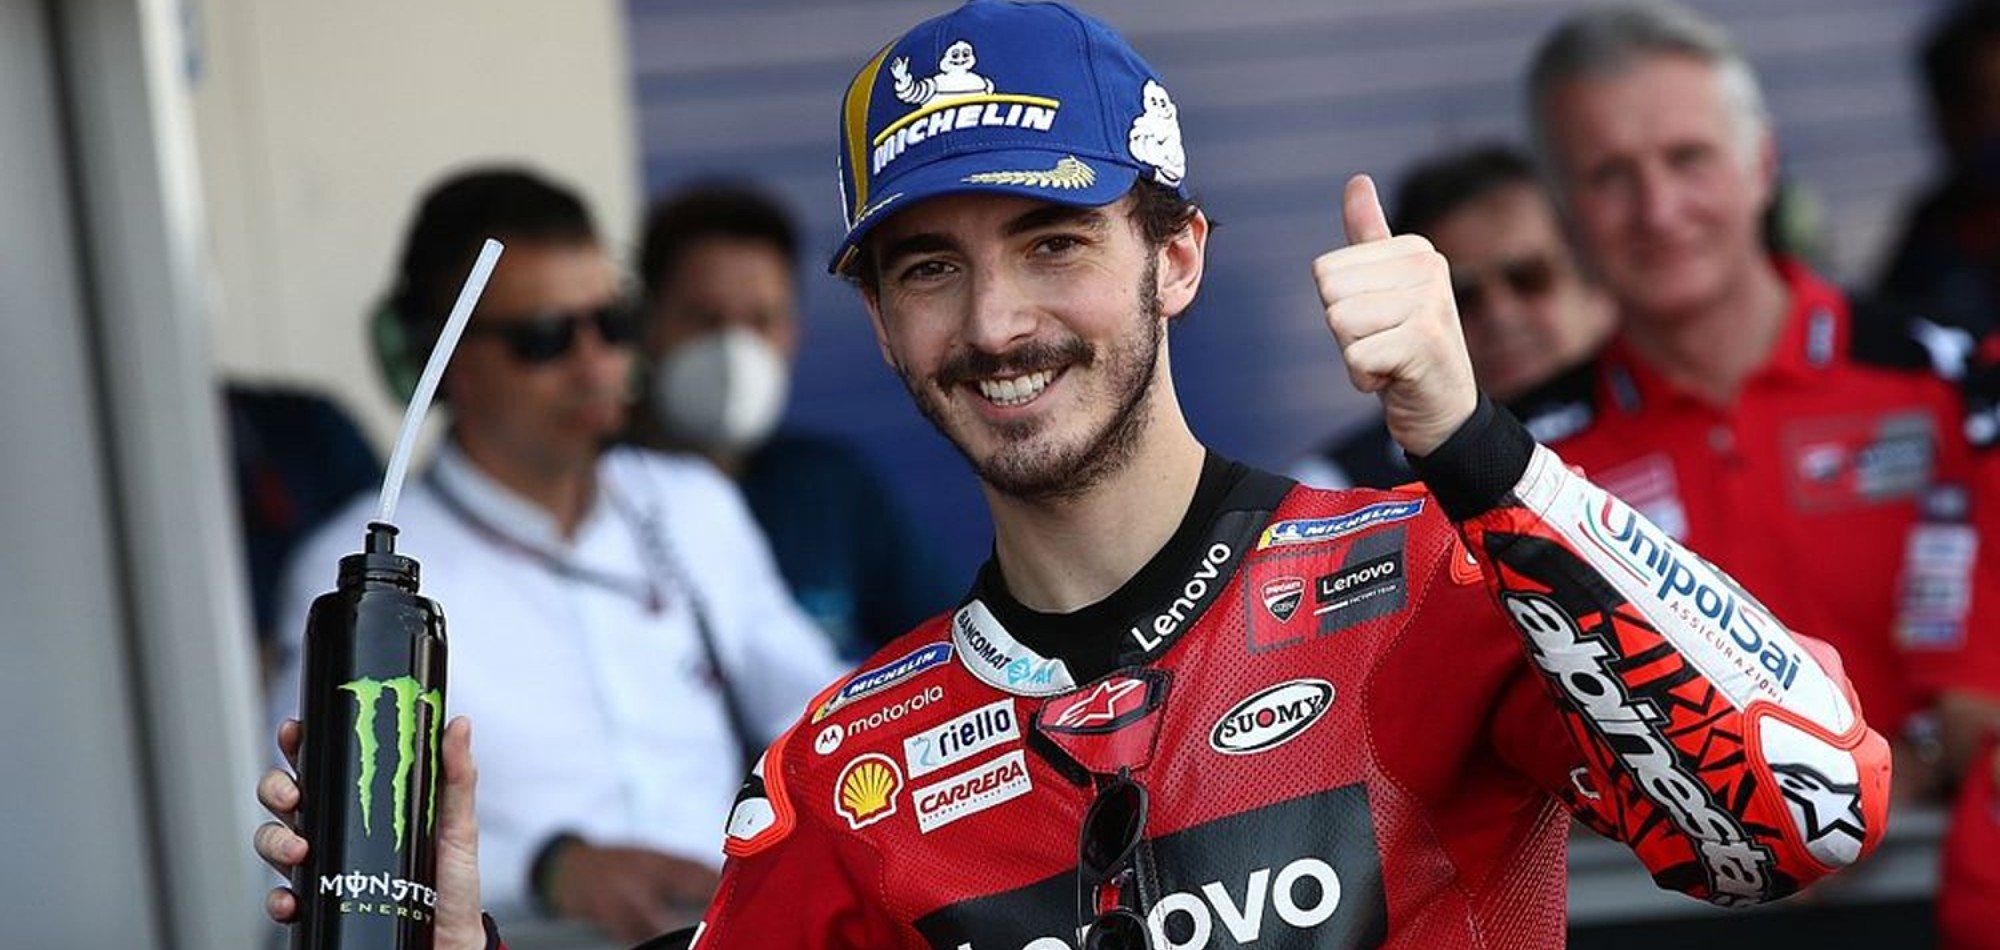 BAGNAIA RECORDS A NEW TRACK-RECORD AT JEREZ MOTOGP PRACTICES 